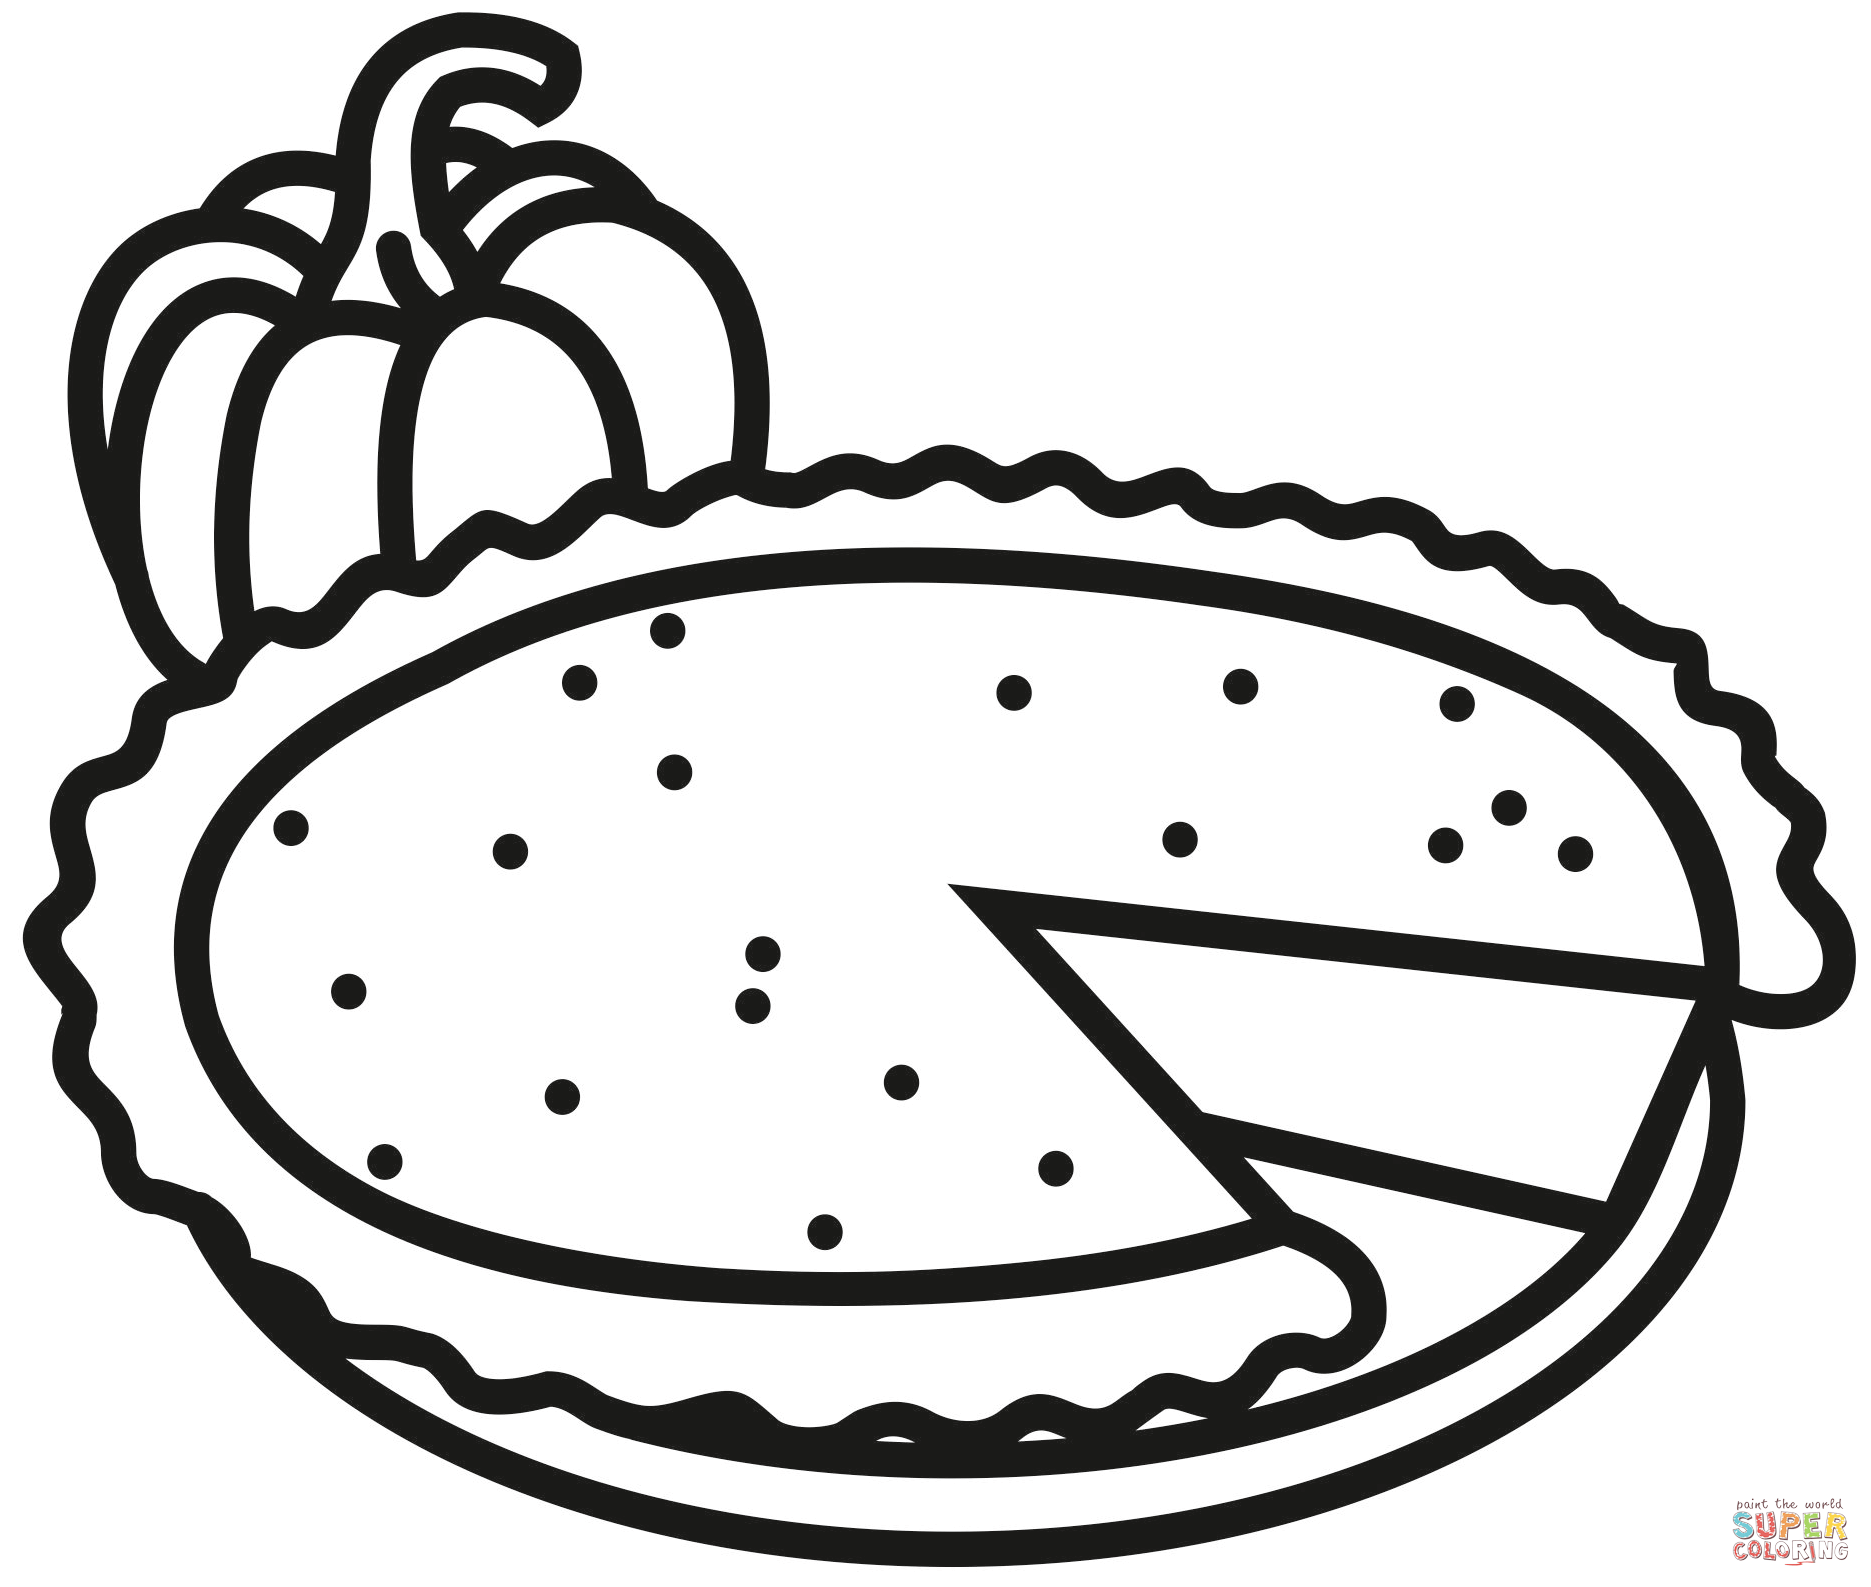 Pumpkin pie coloring page free printable coloring pages